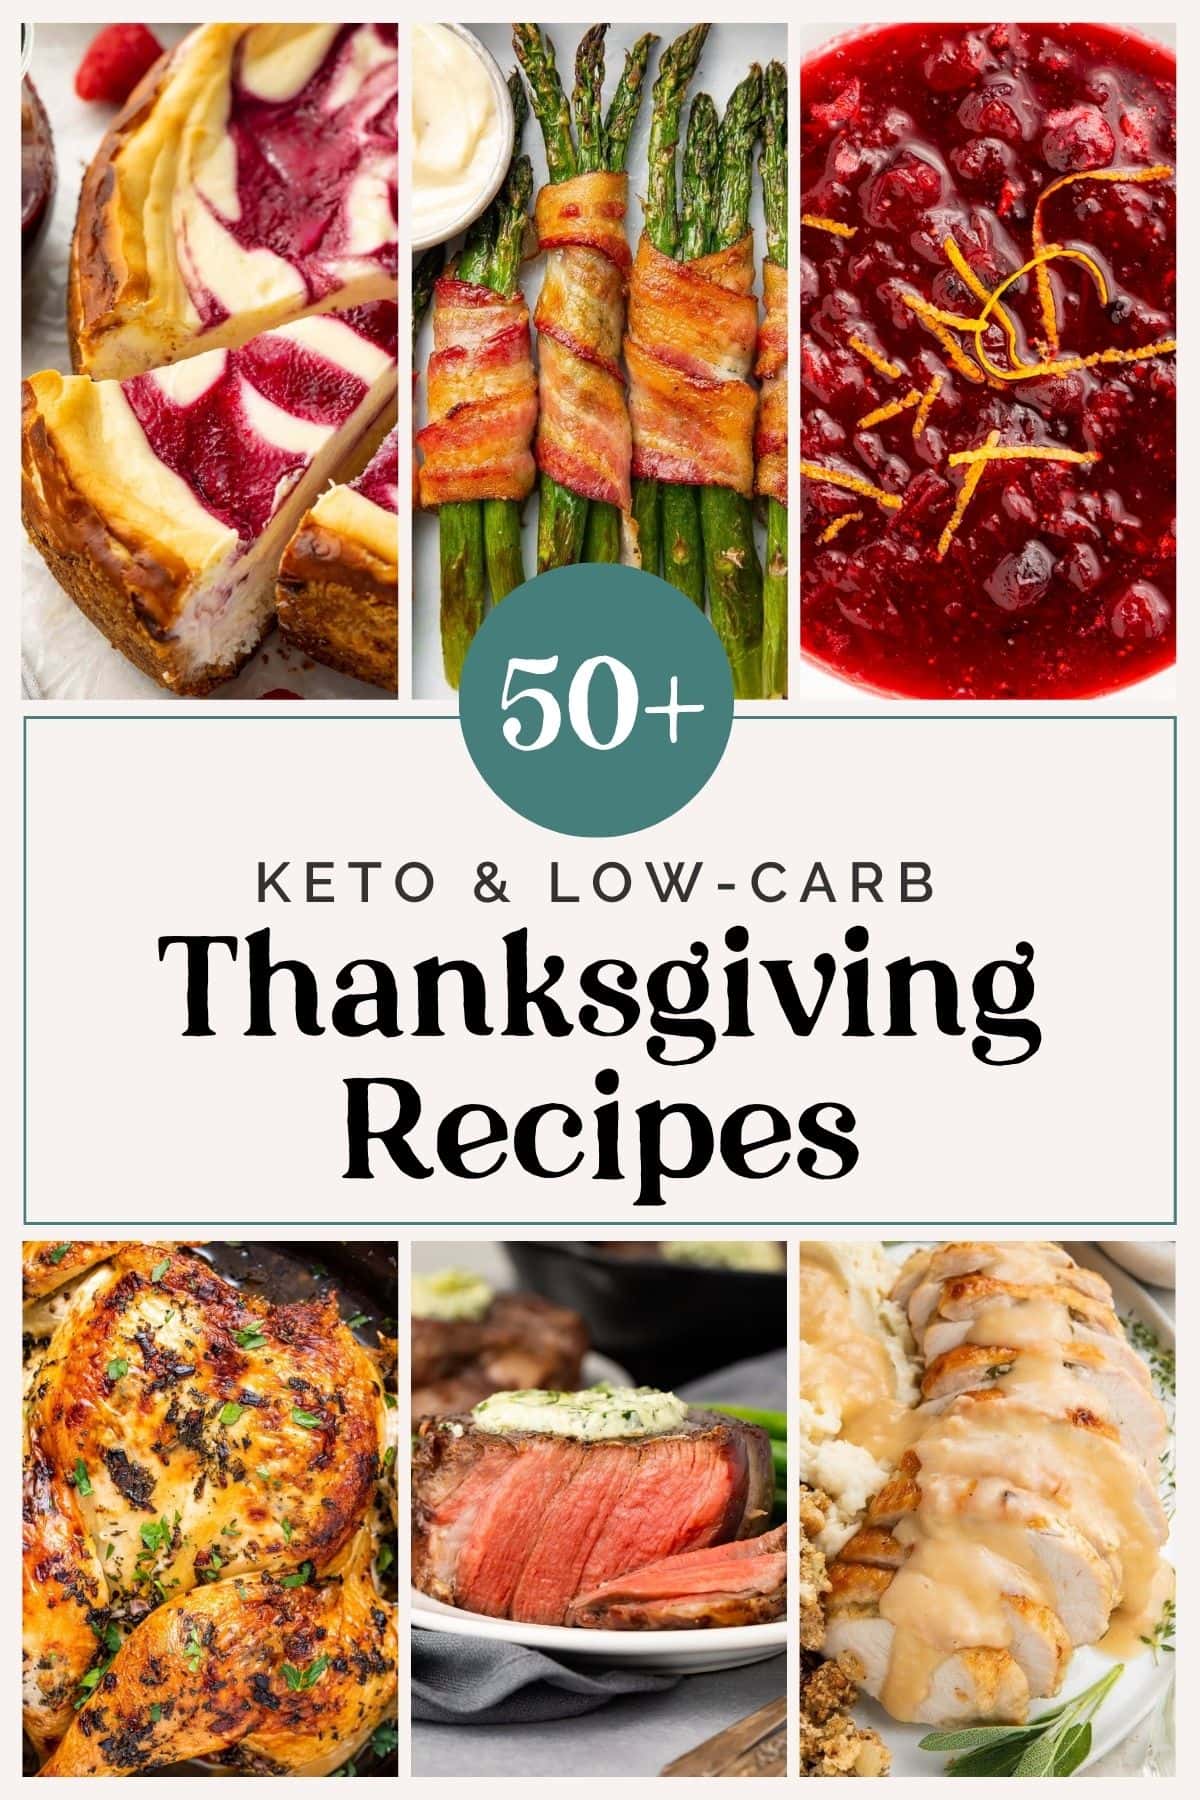 Graphic for 50+ low carb and keto Thanksgiving recipes roundup.